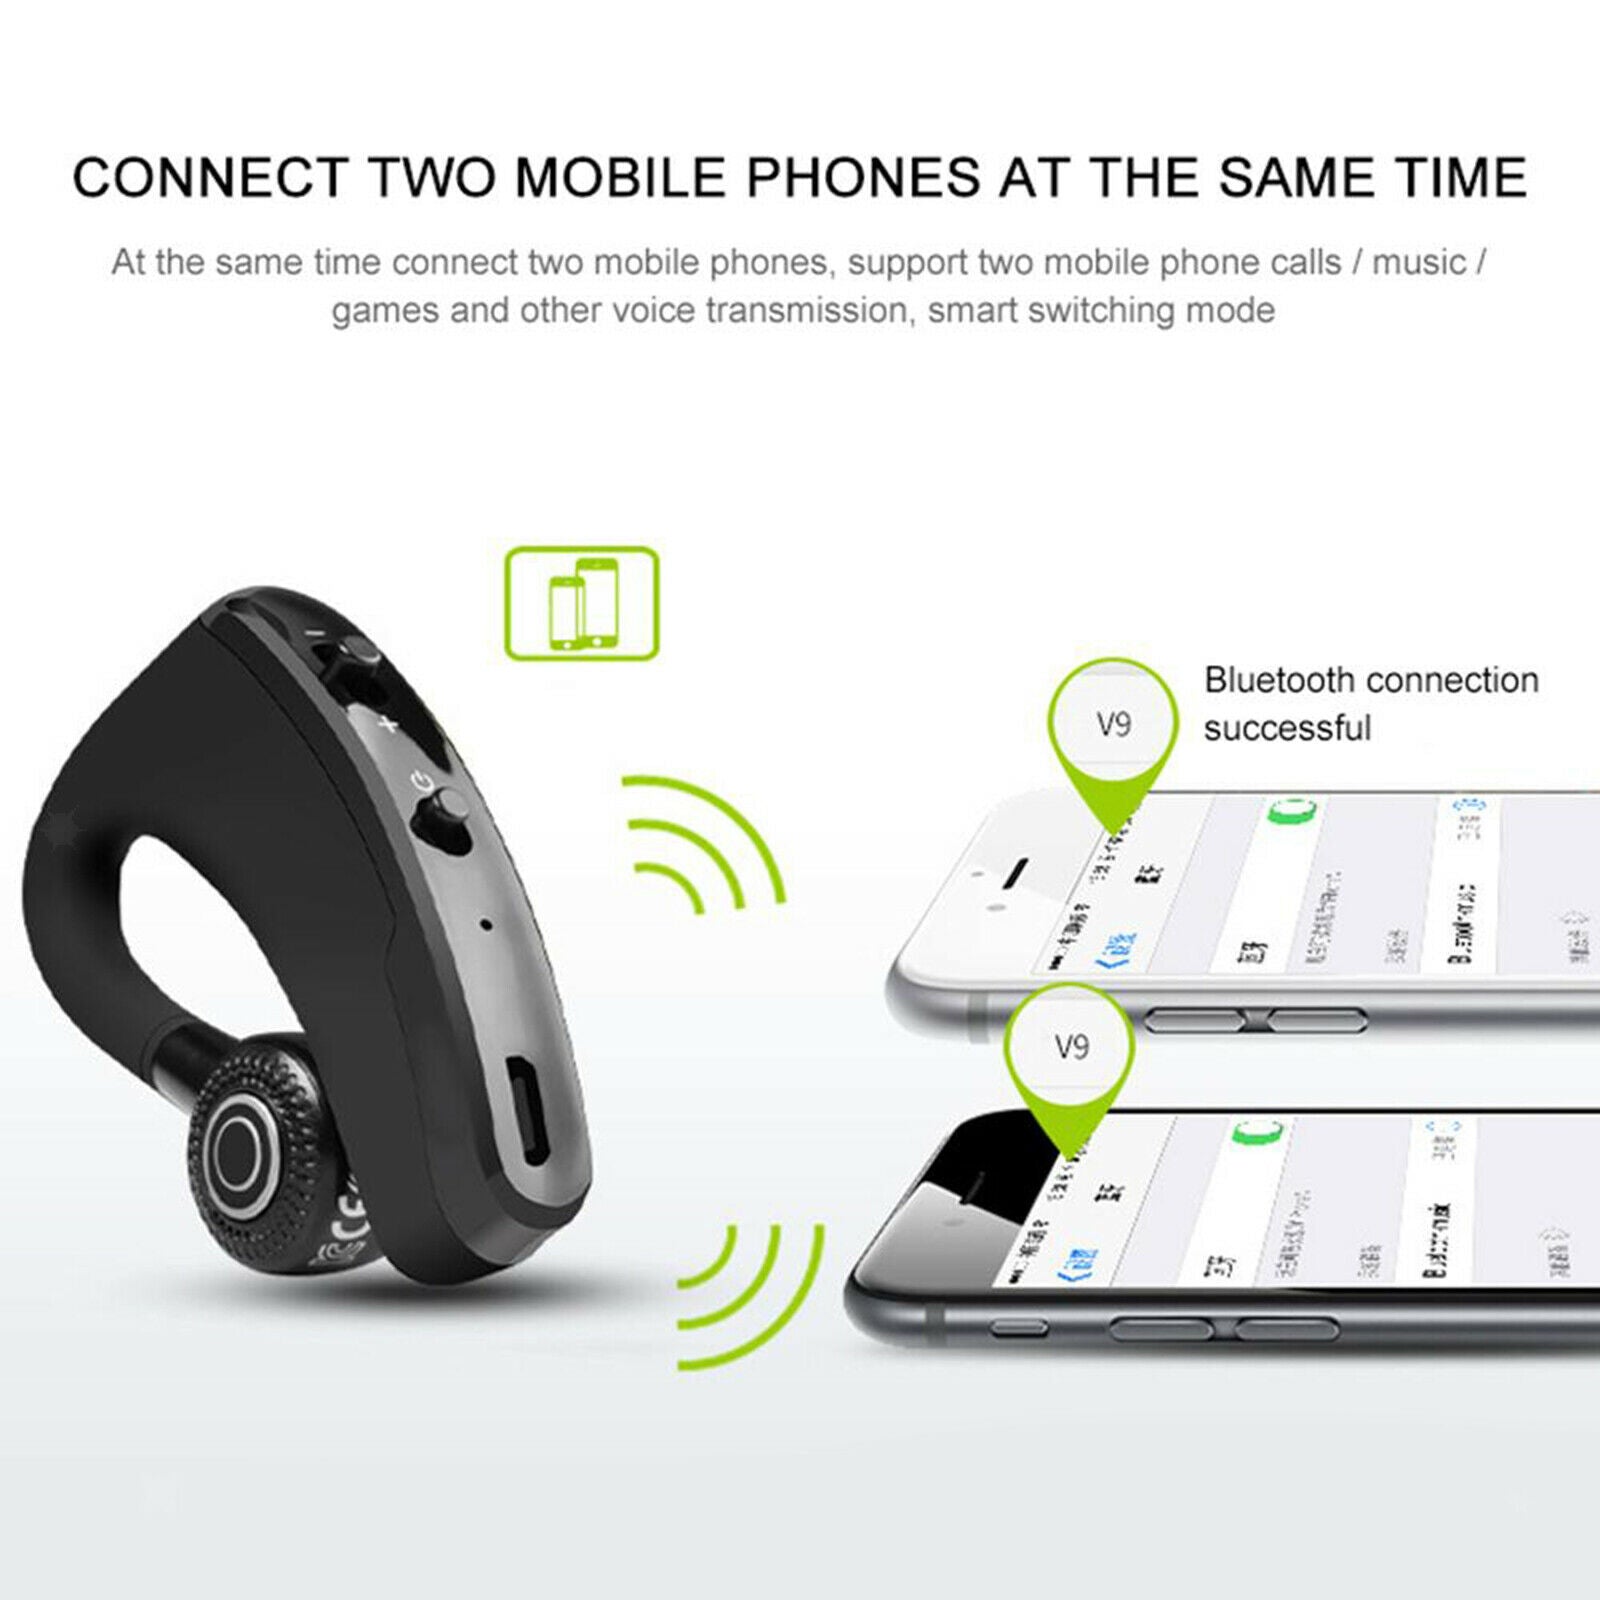 V9 Bluetooth Headset V4.0 with Microphone for Cell Phone Business Office